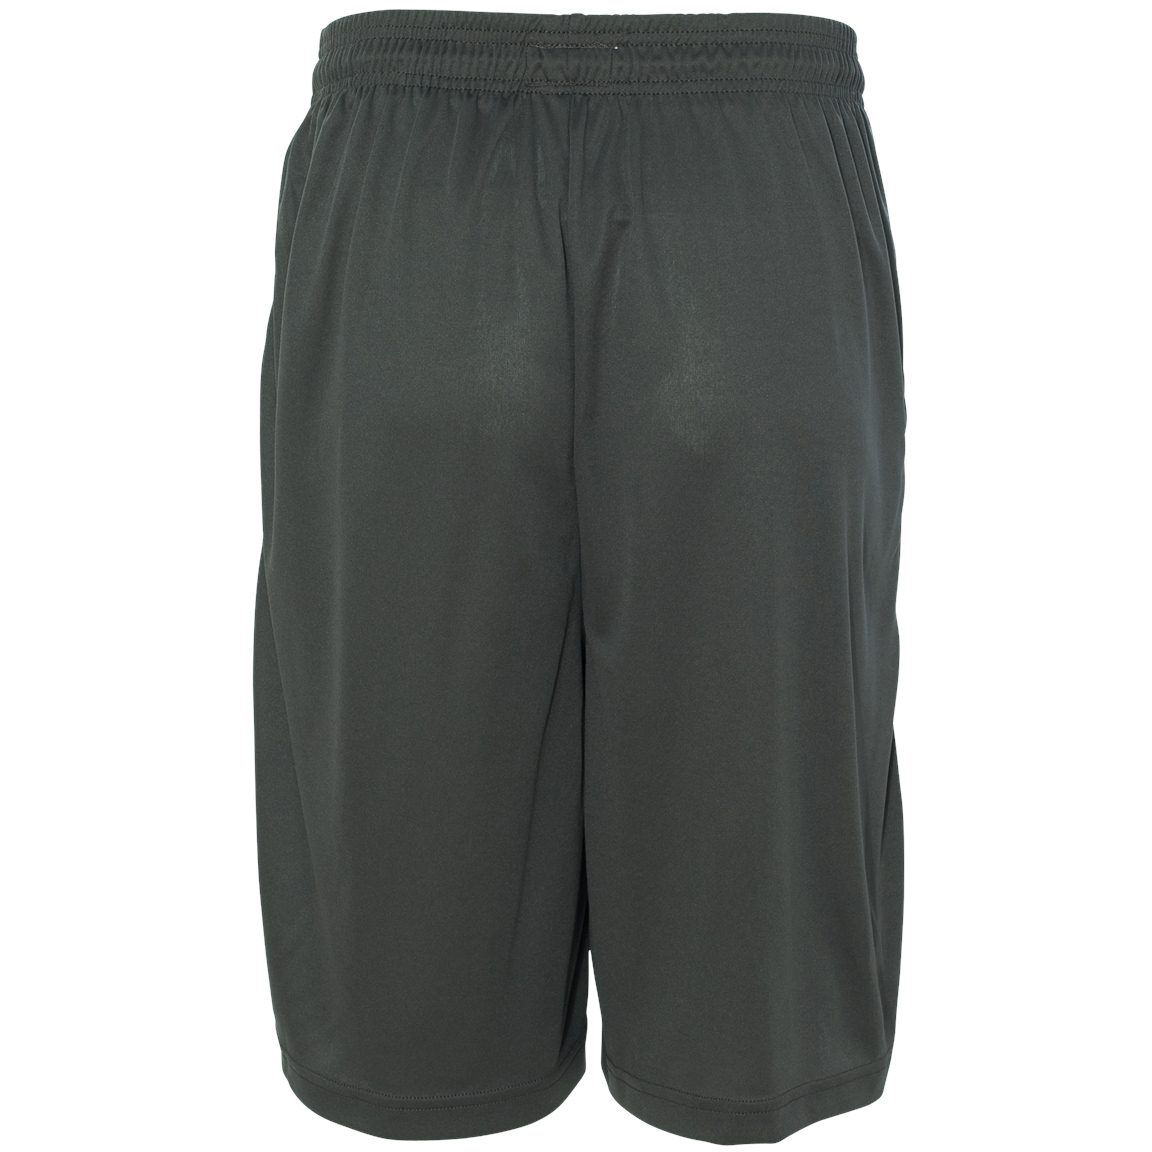 Badger Men's B-Core 10 Performance Shorts with Pockets 4119 S-3XL 